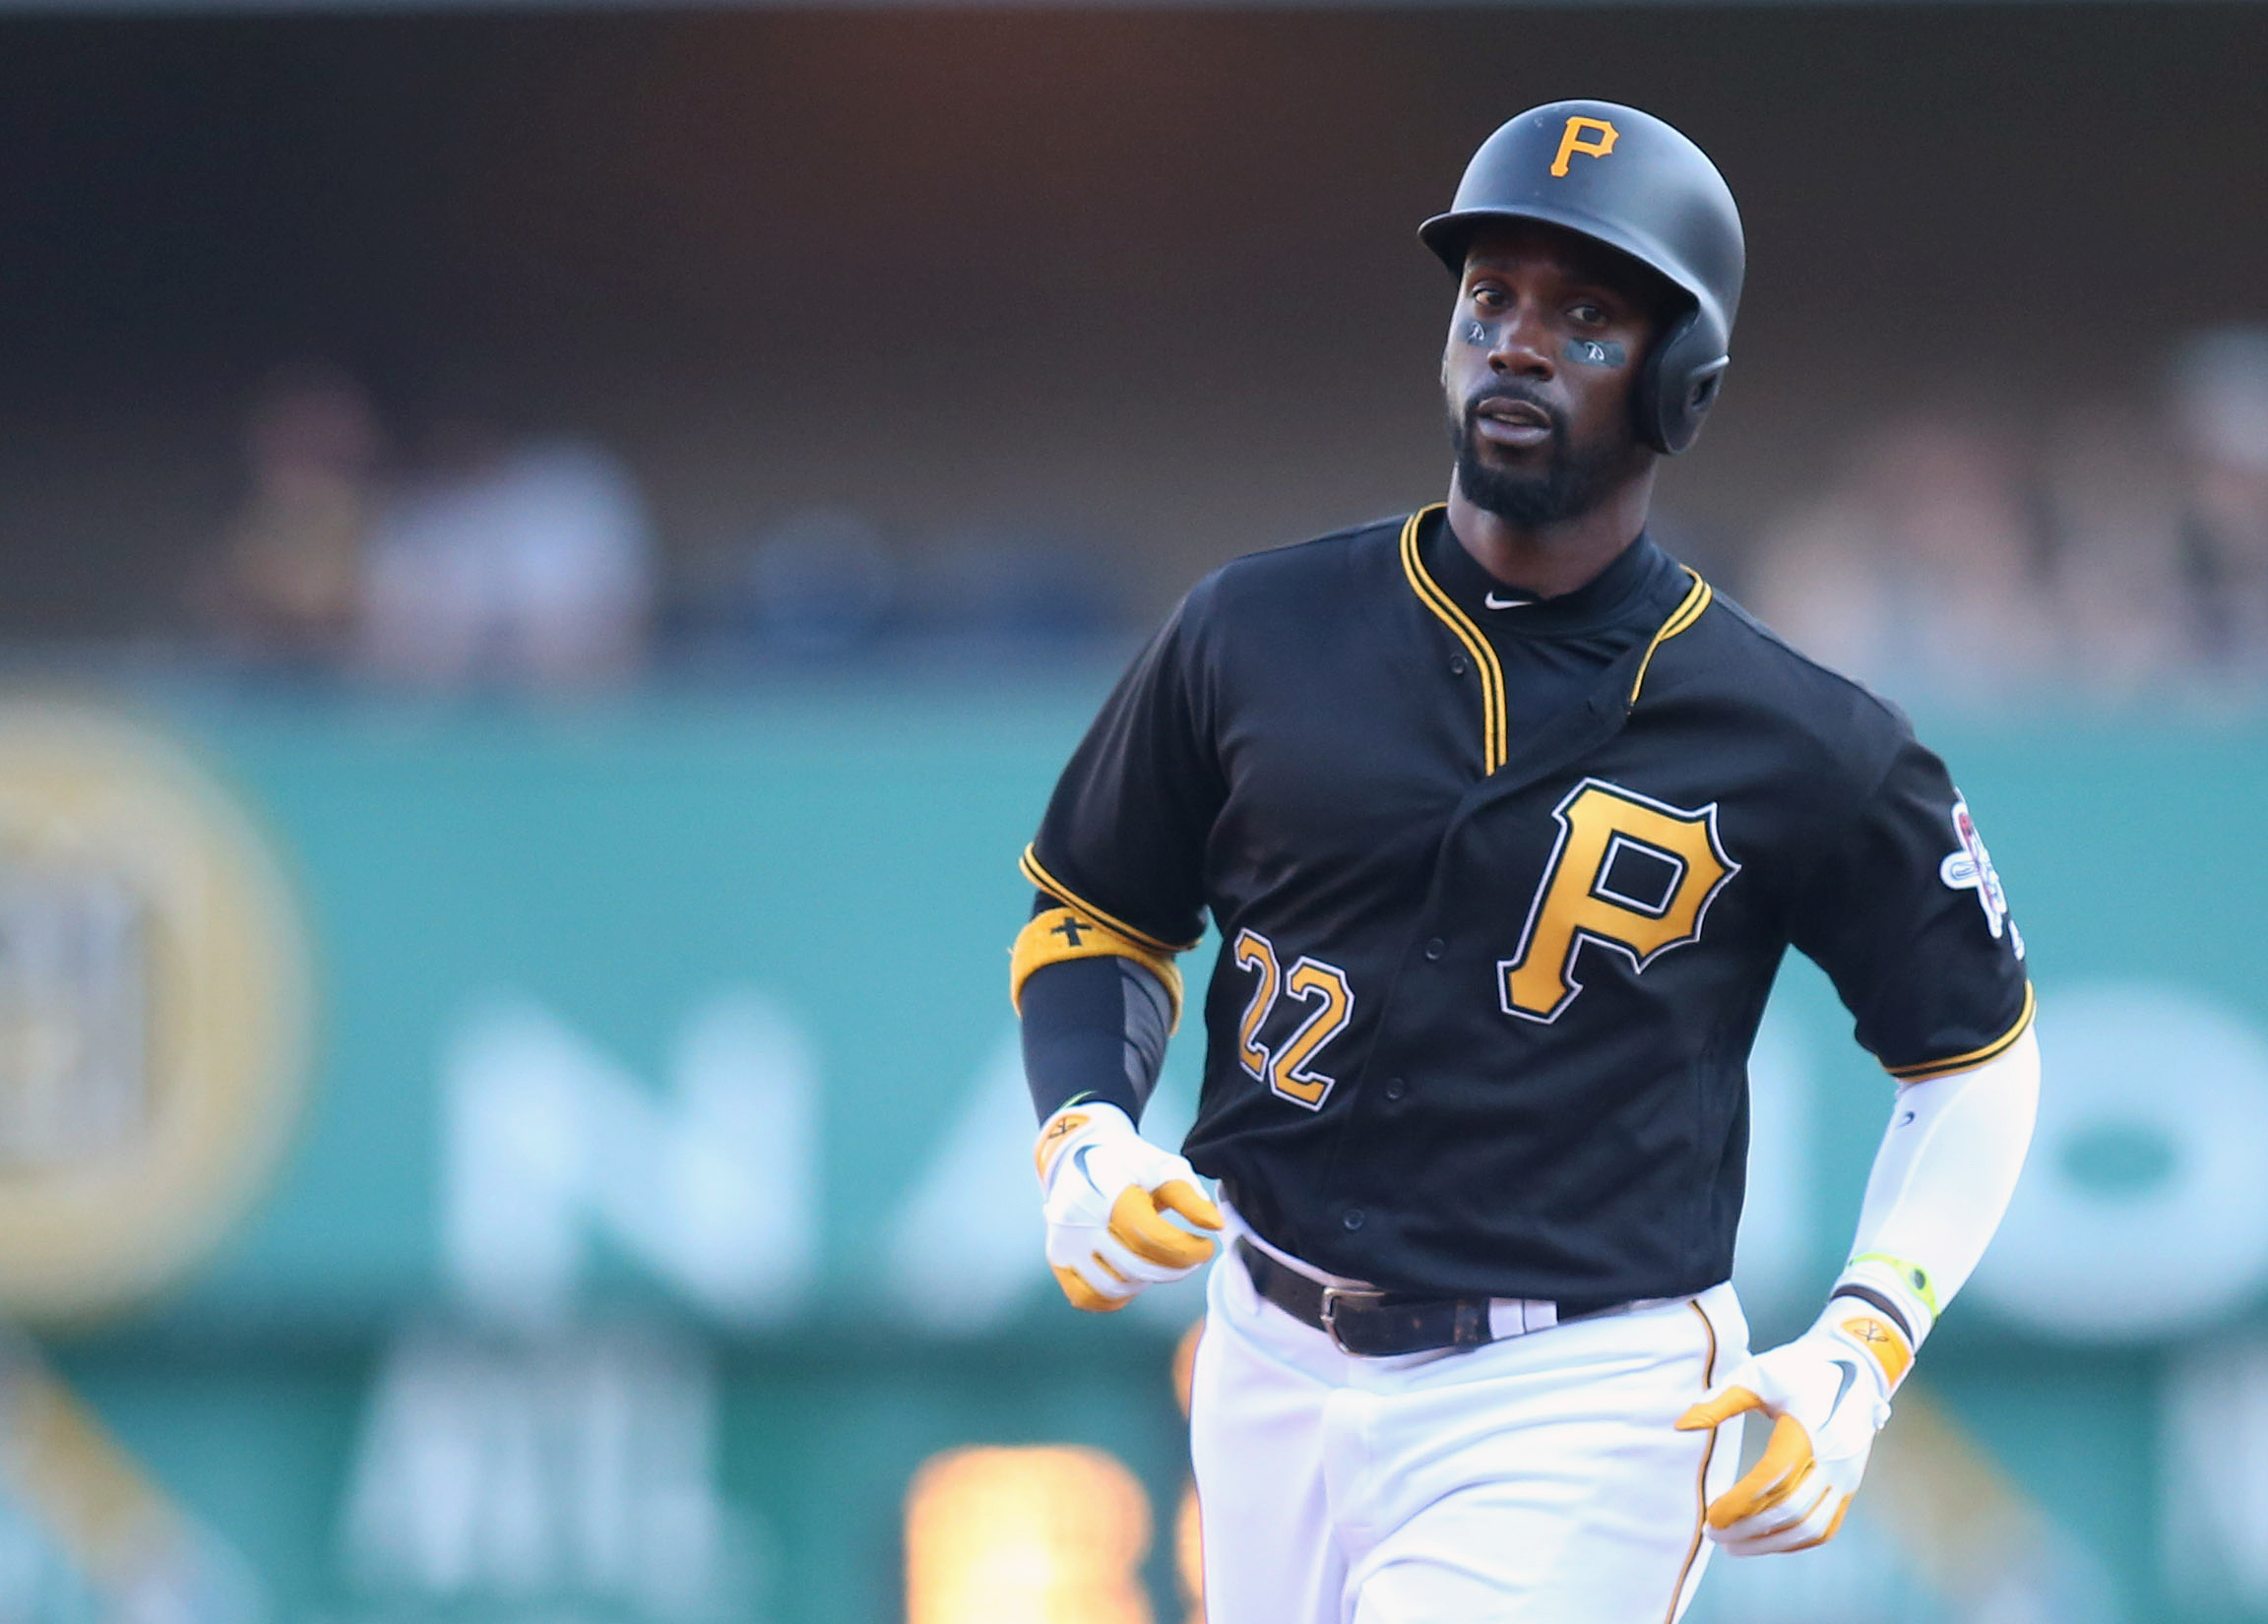 Sep 5, 2016; Pittsburgh, PA, USA; Pittsburgh Pirates center fielder Andrew McCutchen (22) circles the bases on a two run home run against the St. Louis Cardinals during the fifth inning at PNC Park. Mandatory Credit: Charles LeClaire-USA TODAY Sports